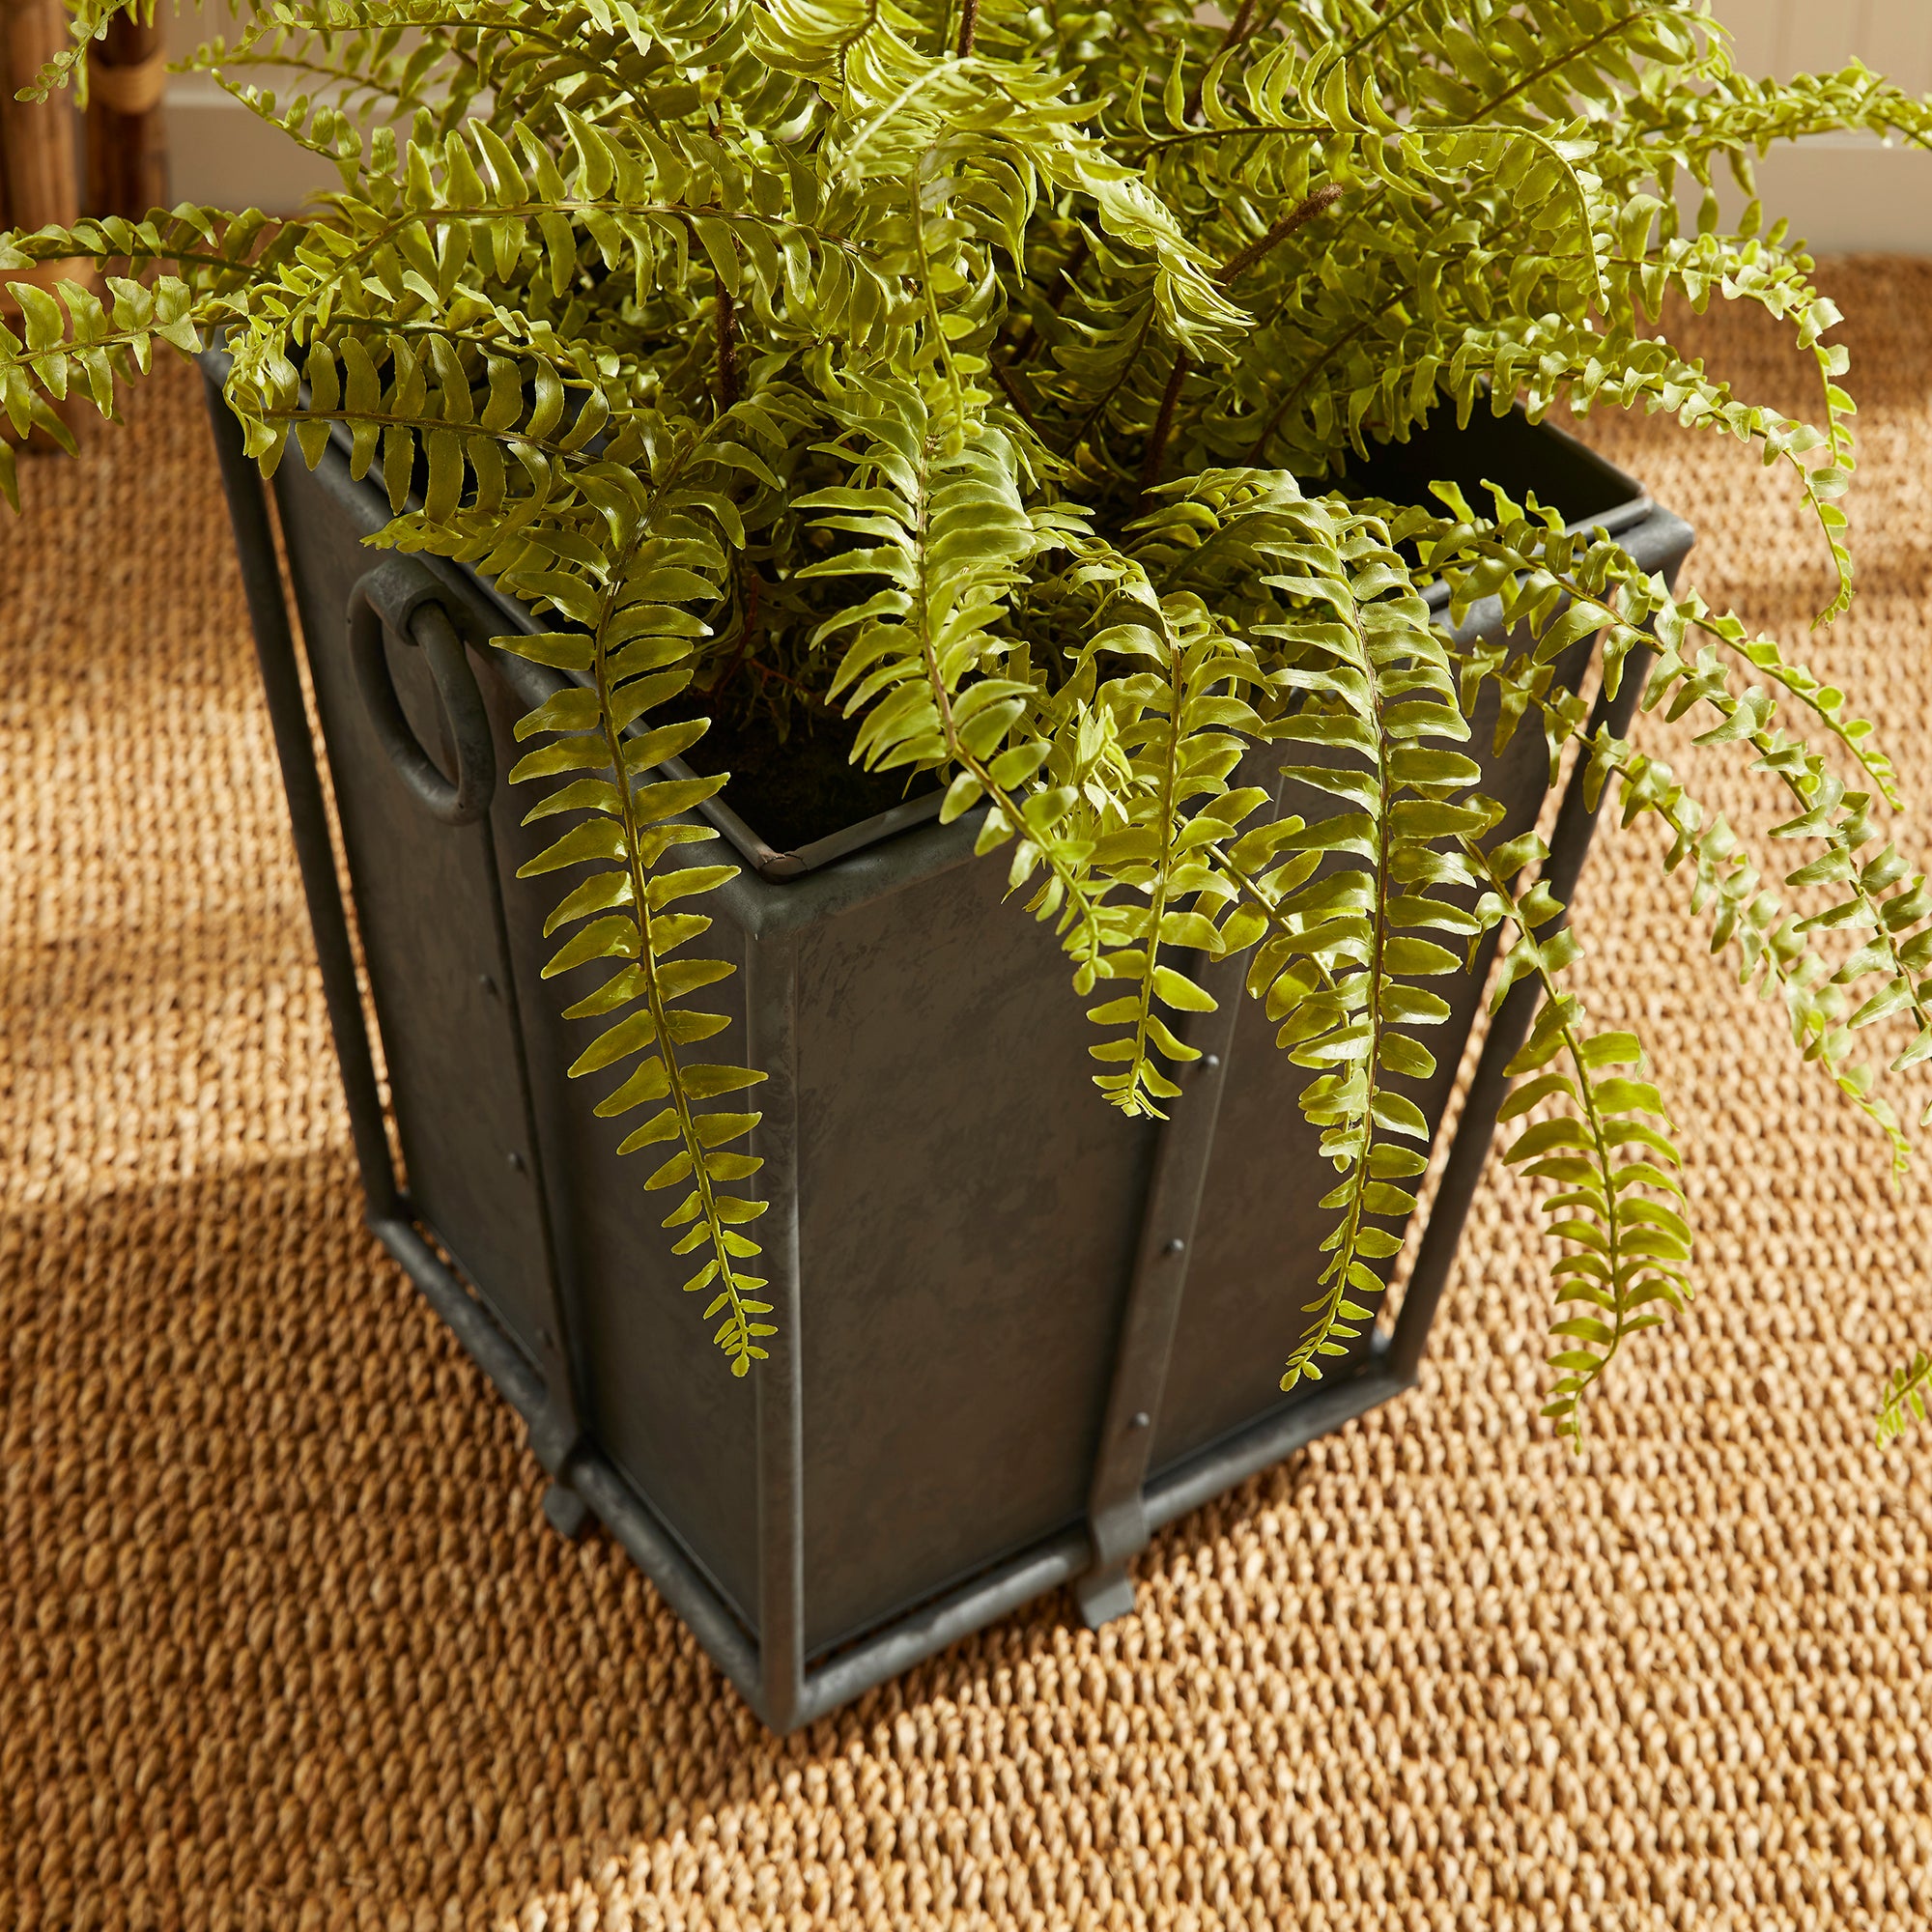 With metal liners that easily slide out, the Callahan Tapered Planter is as practical as it is handsome. The rounded handles and traditional design make it an outdoor classic. Amethyst Home provides interior design, new construction, custom furniture, and area rugs in the Nashville metro area.